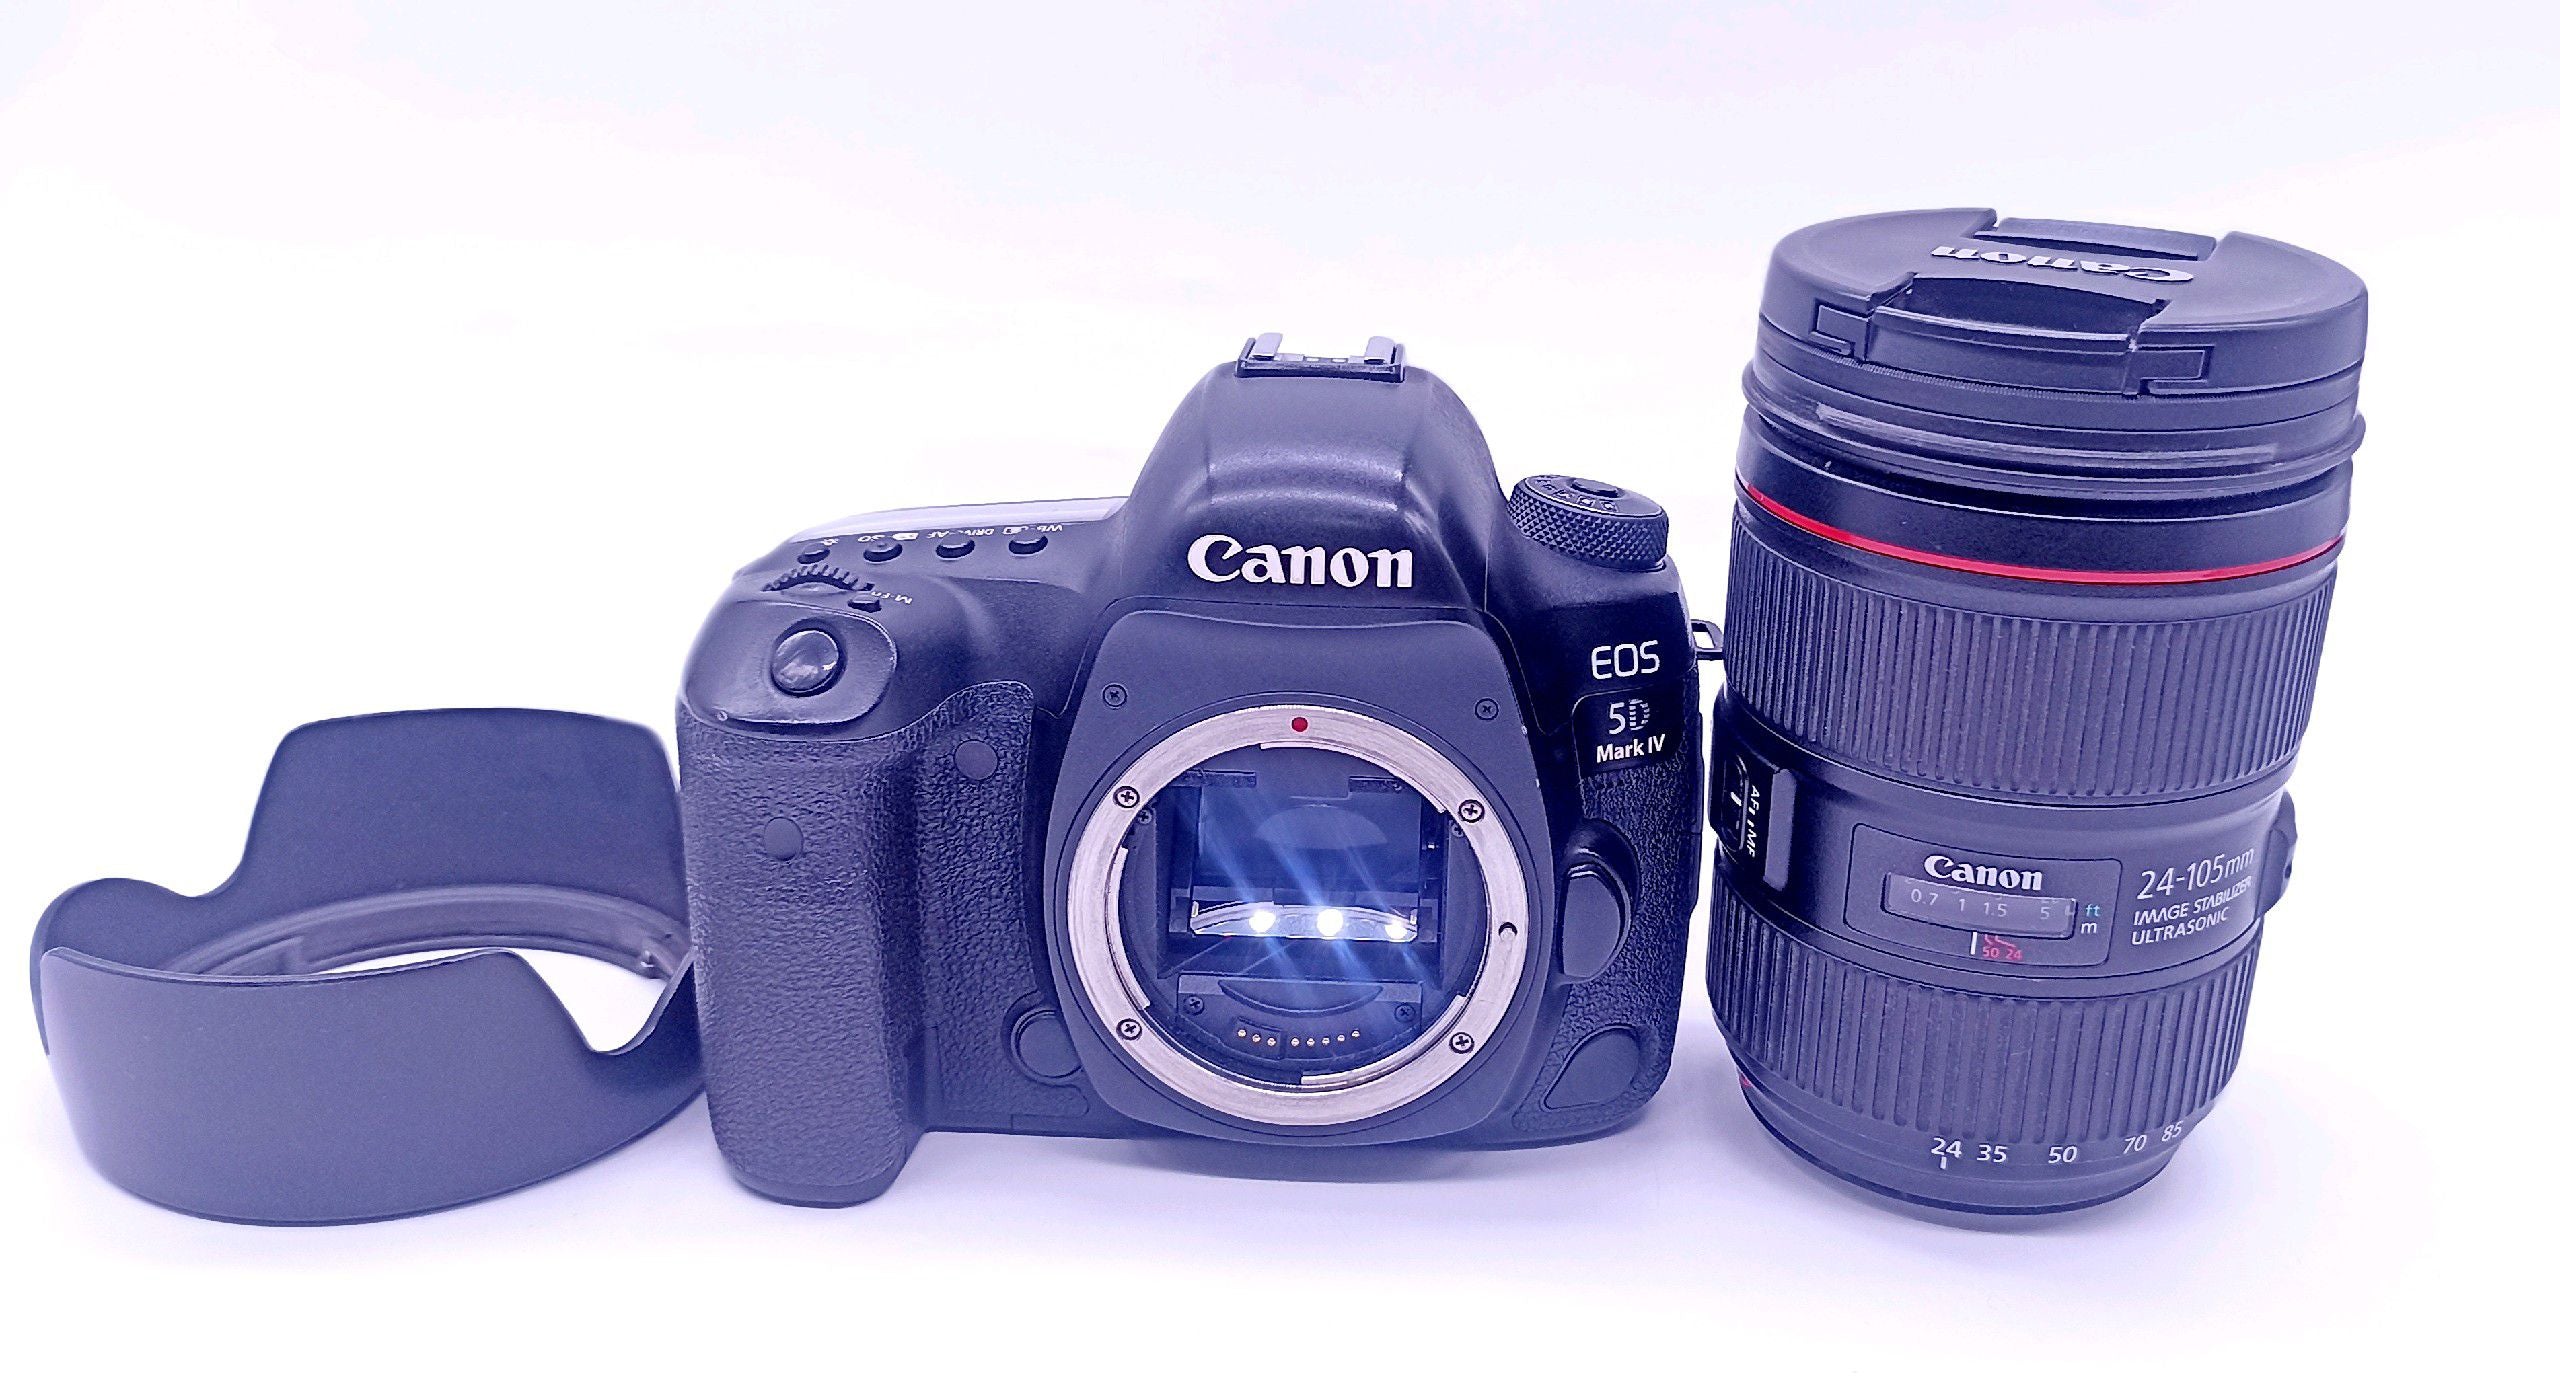 Used Canon Eos 5D Mark IV with 24-105mm Lens Kit